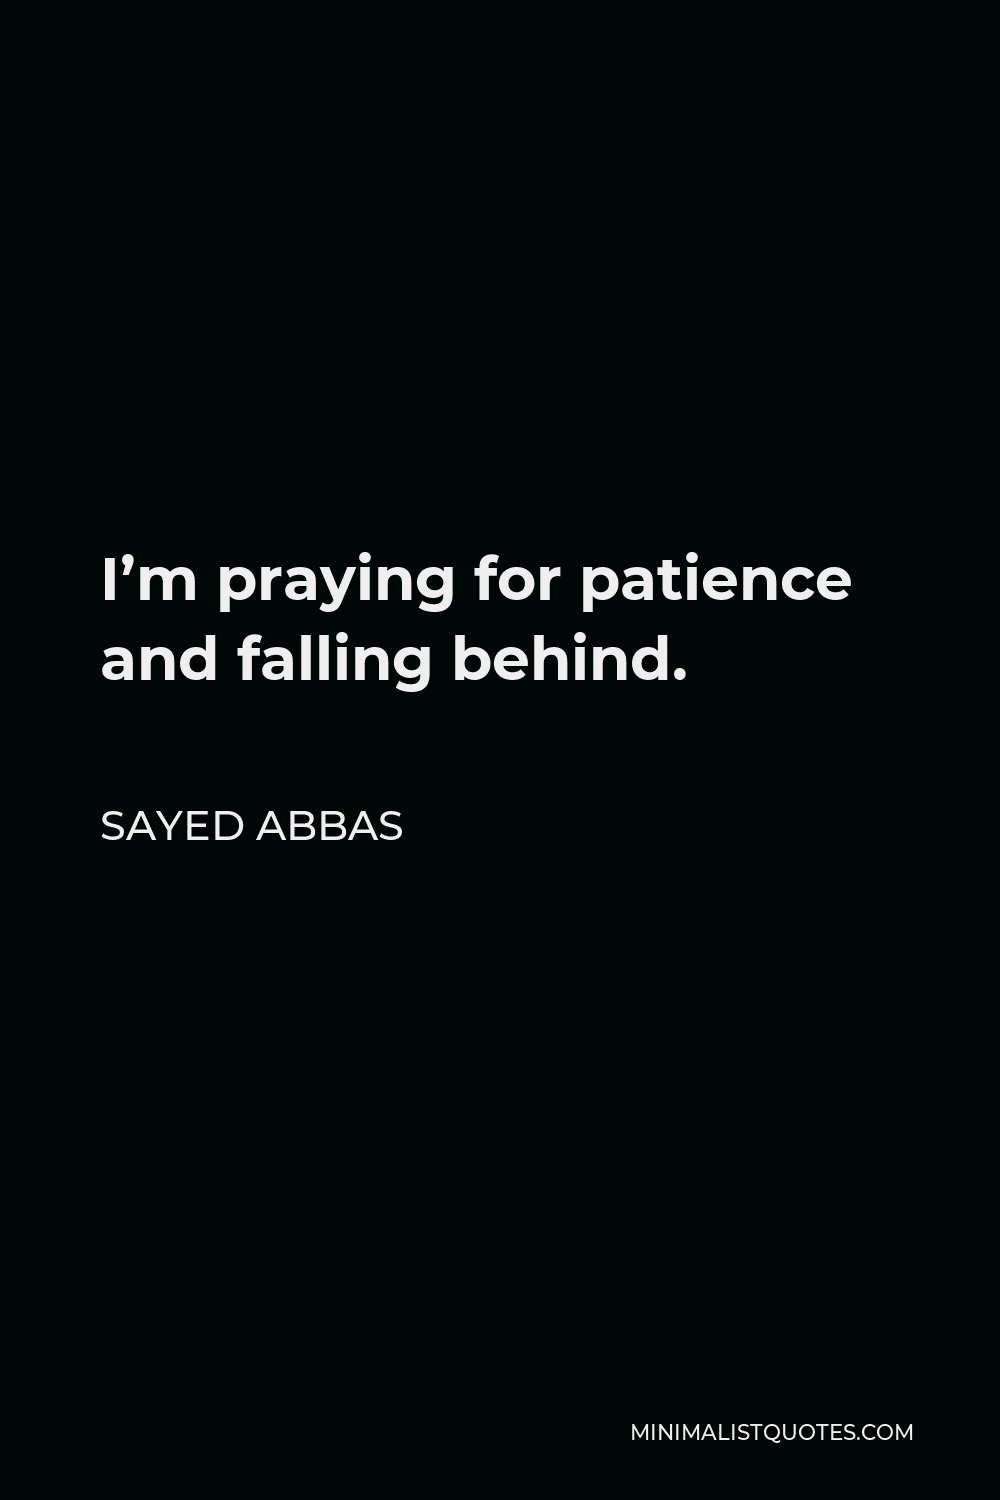 Sayed Abbas Quote - I’m praying for patience and falling behind.